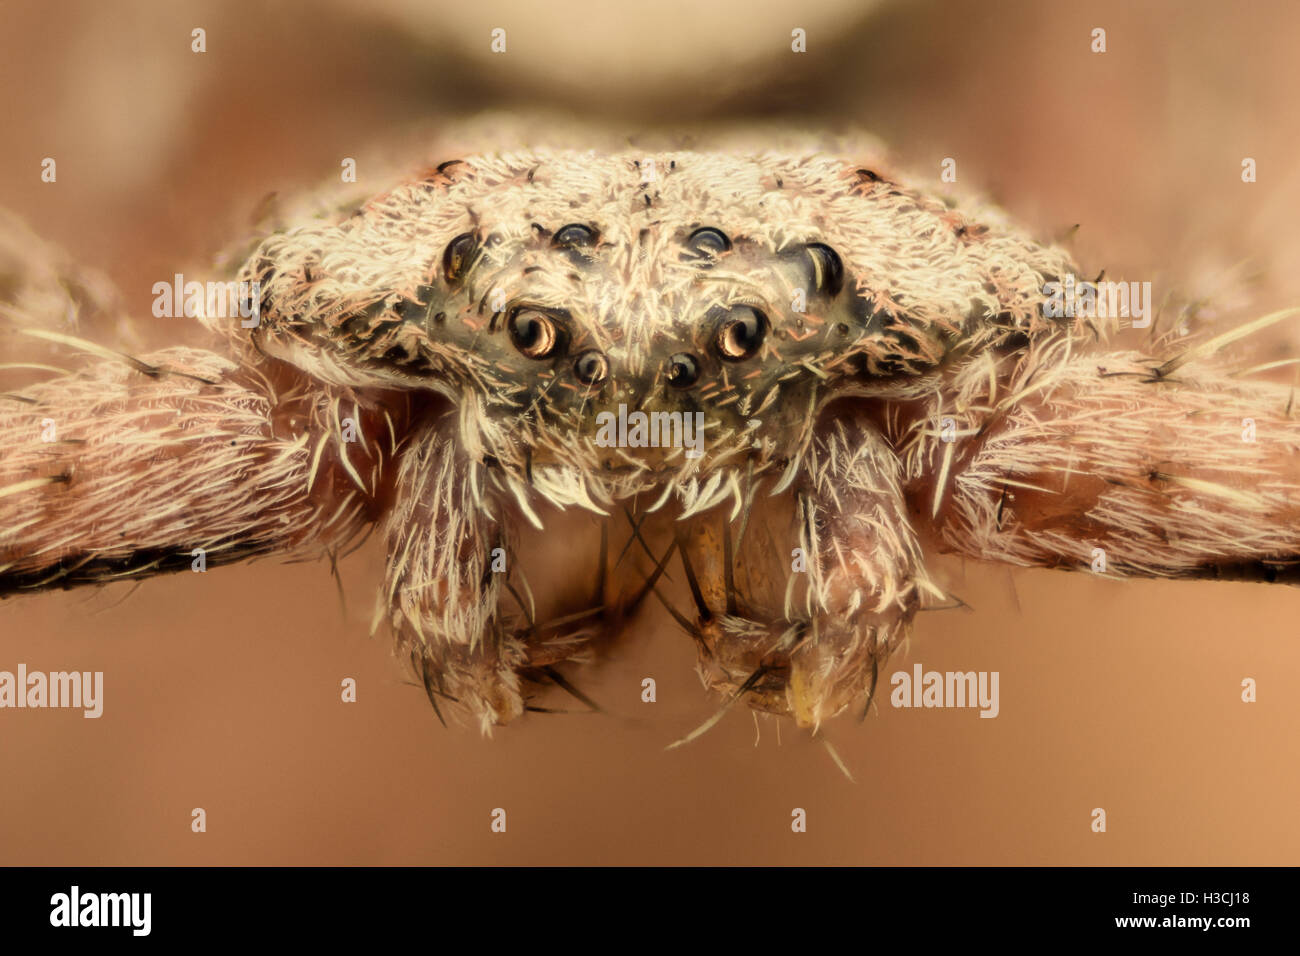 Extreme magnification - Flat spider, crab, front view Stock Photo